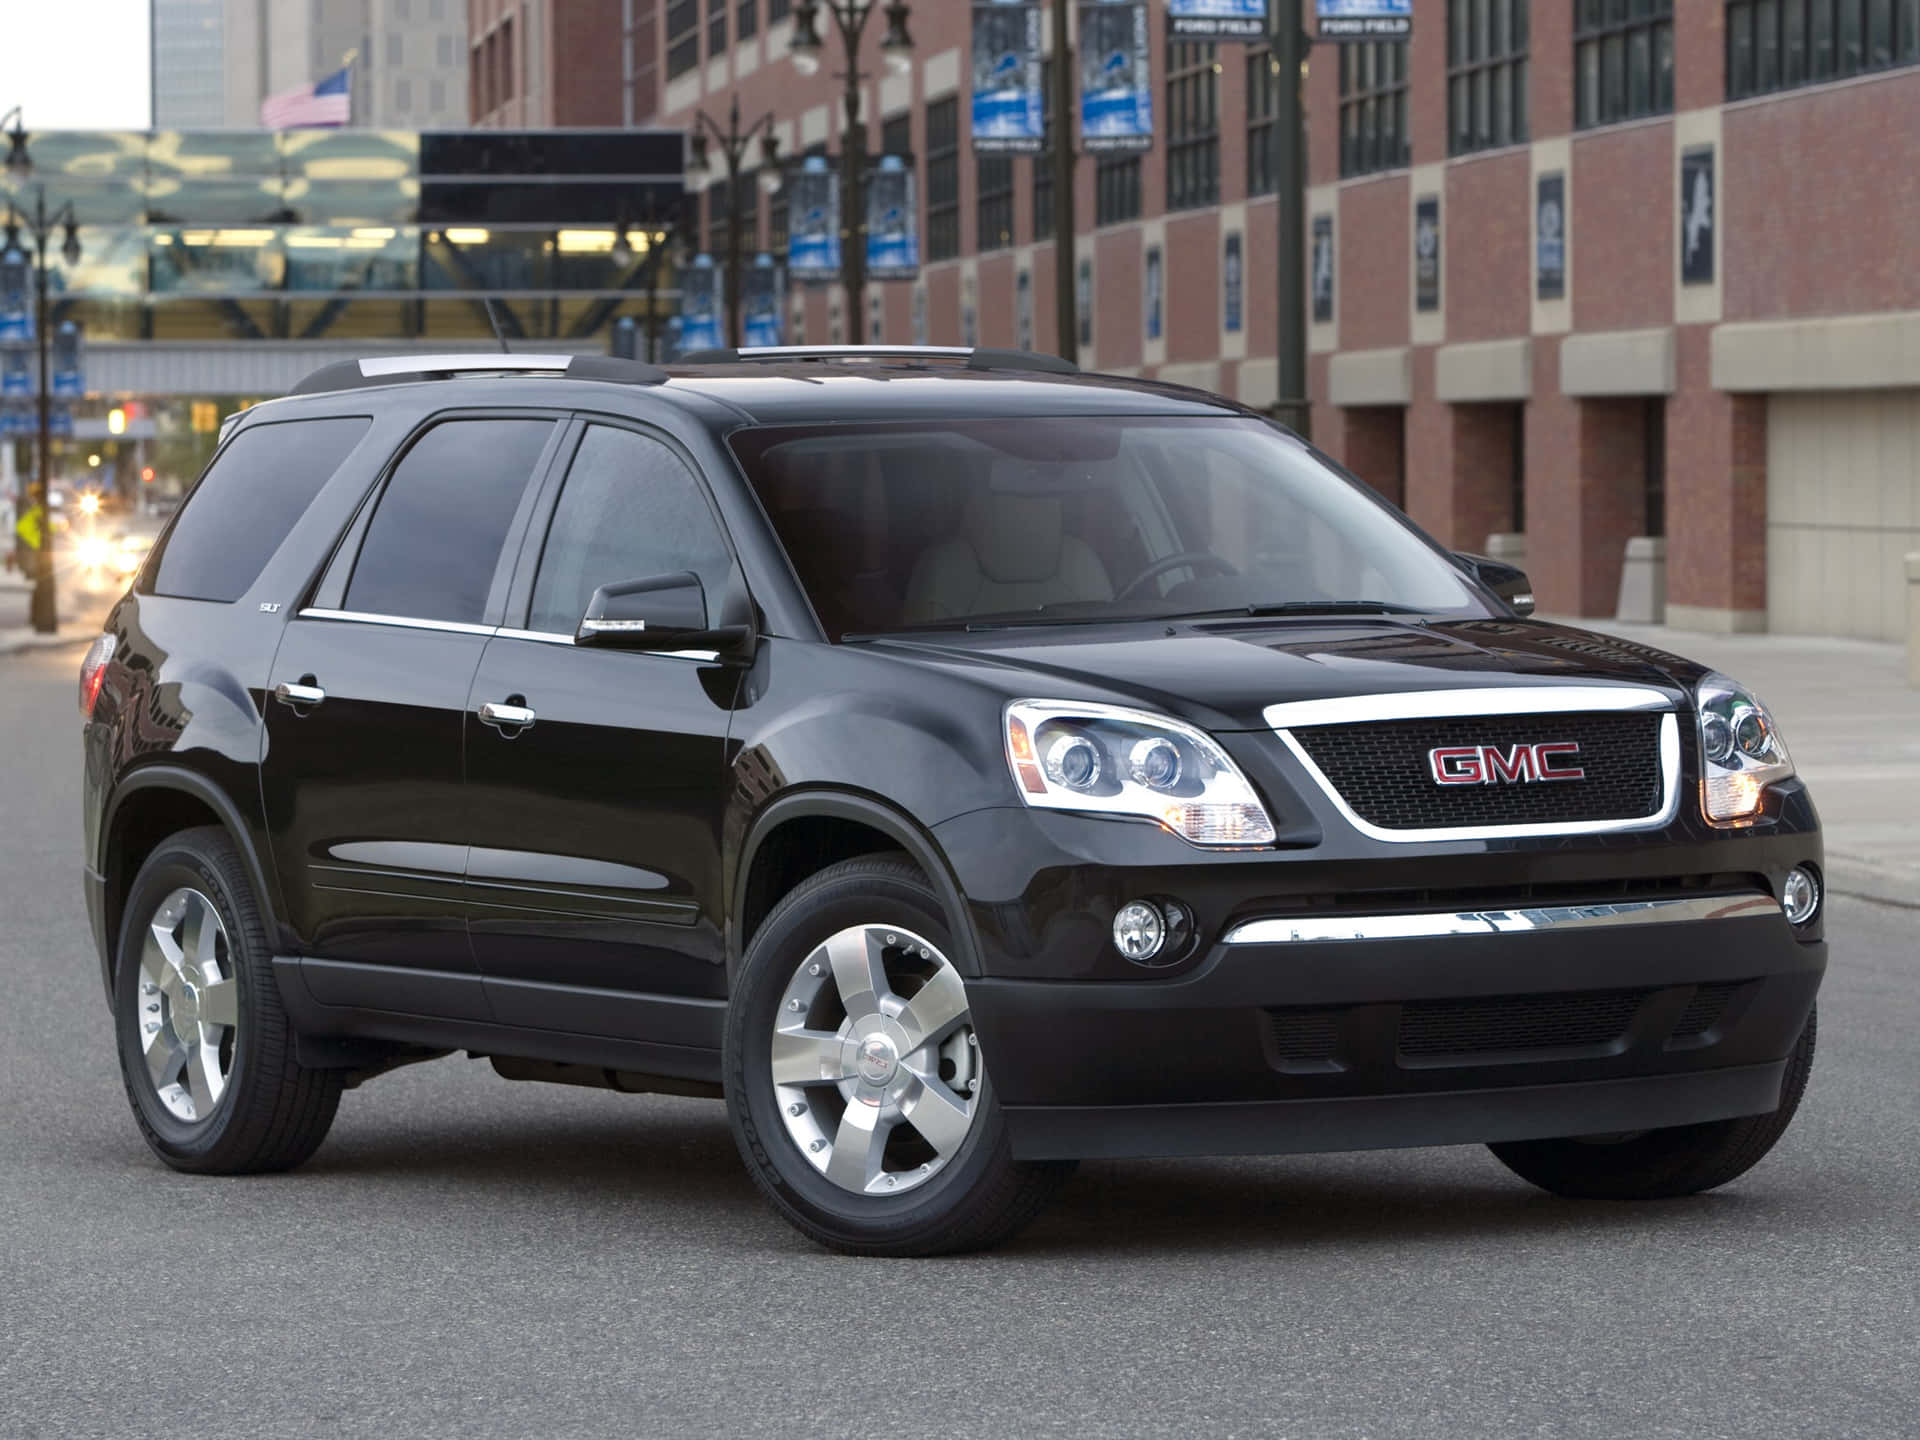 Captivating GMC Acadia in the Wilderness Wallpaper